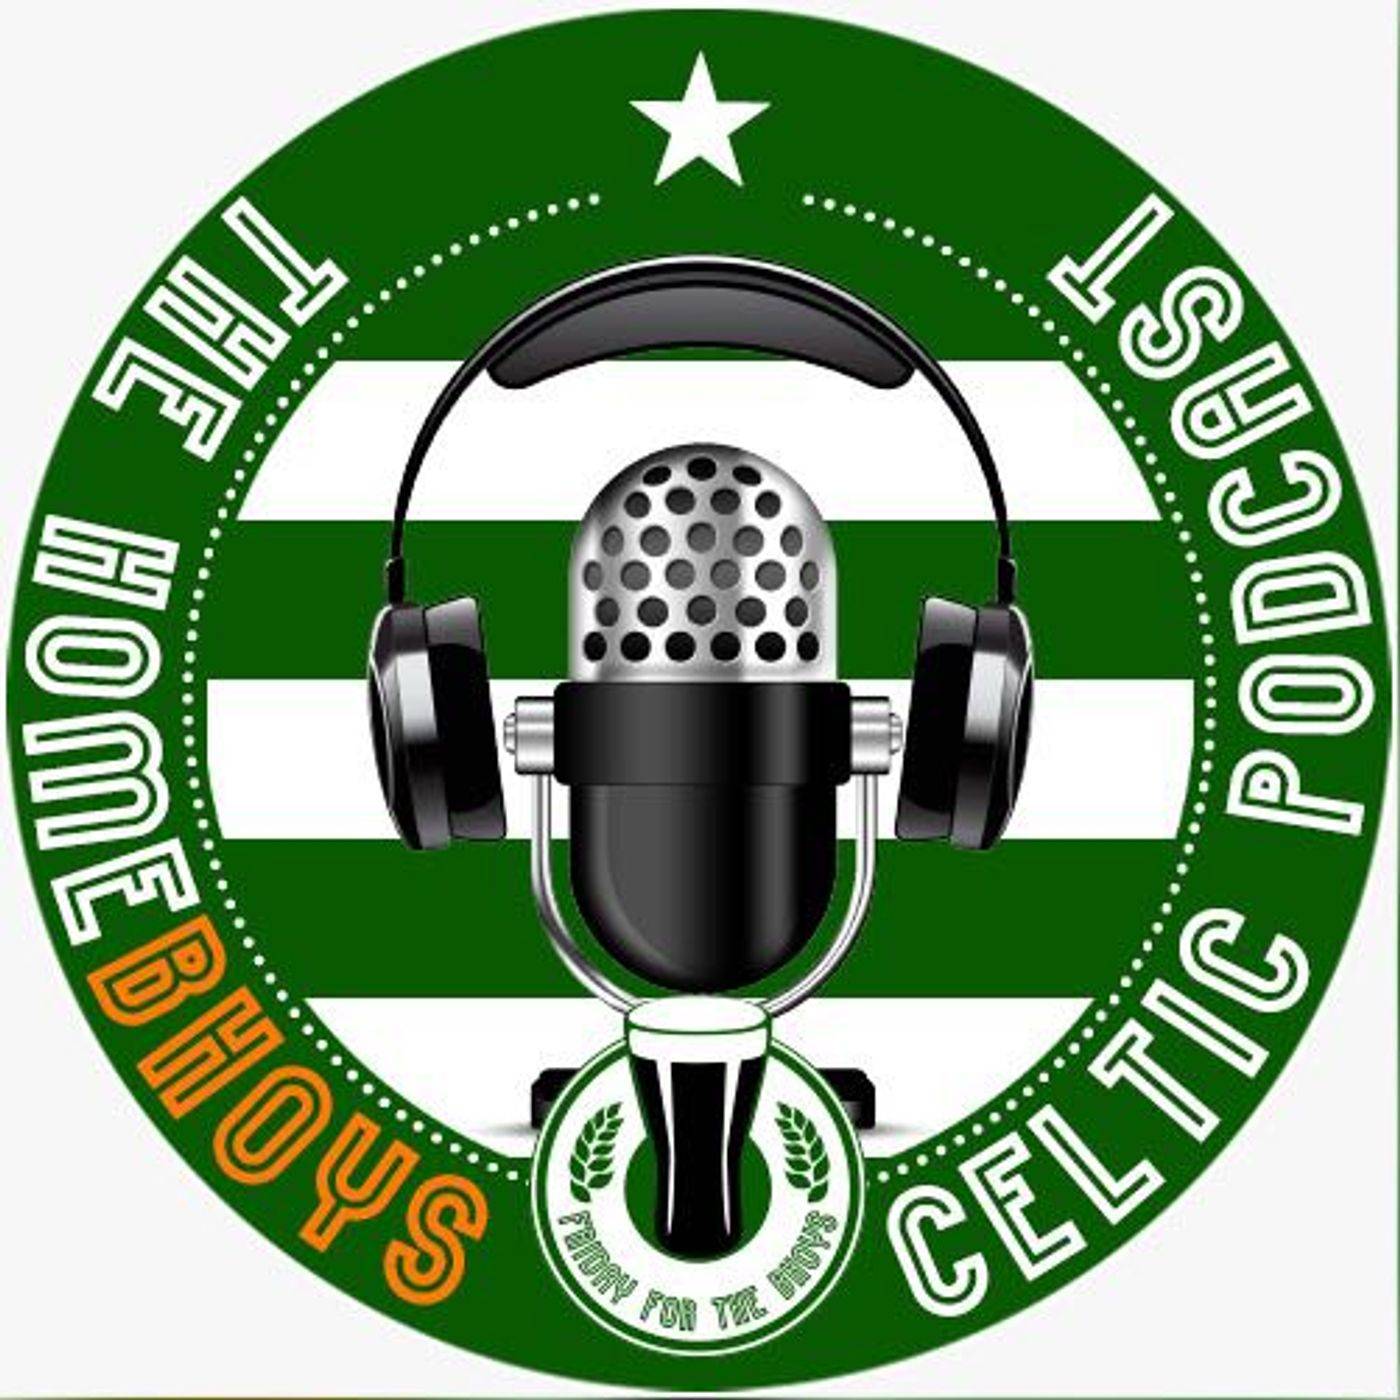 HomeBhoys #393 – Time to Fight!